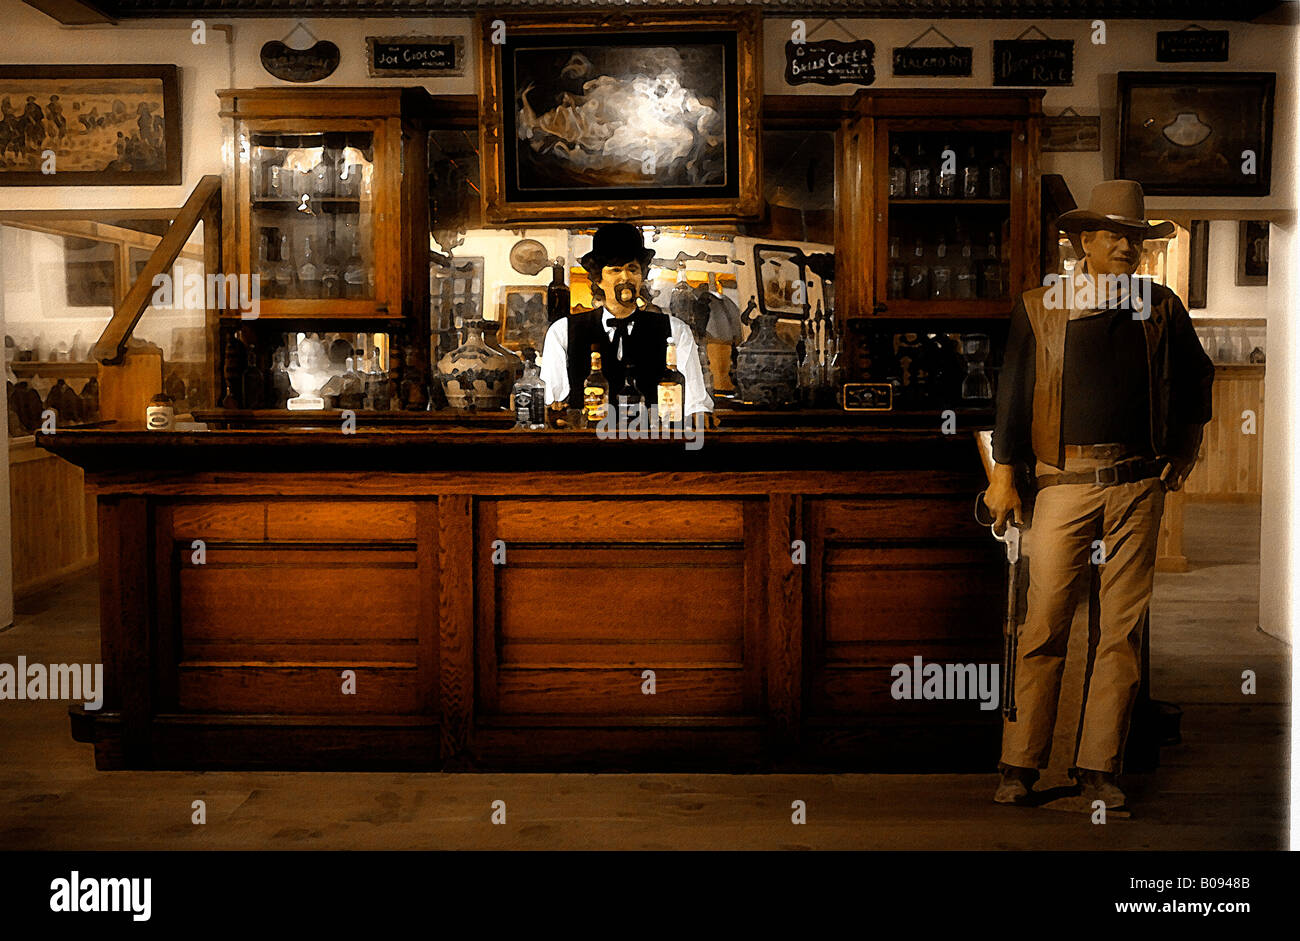 Image Of A Manikin Bartender Behind A Vintage Western Saloon Counter